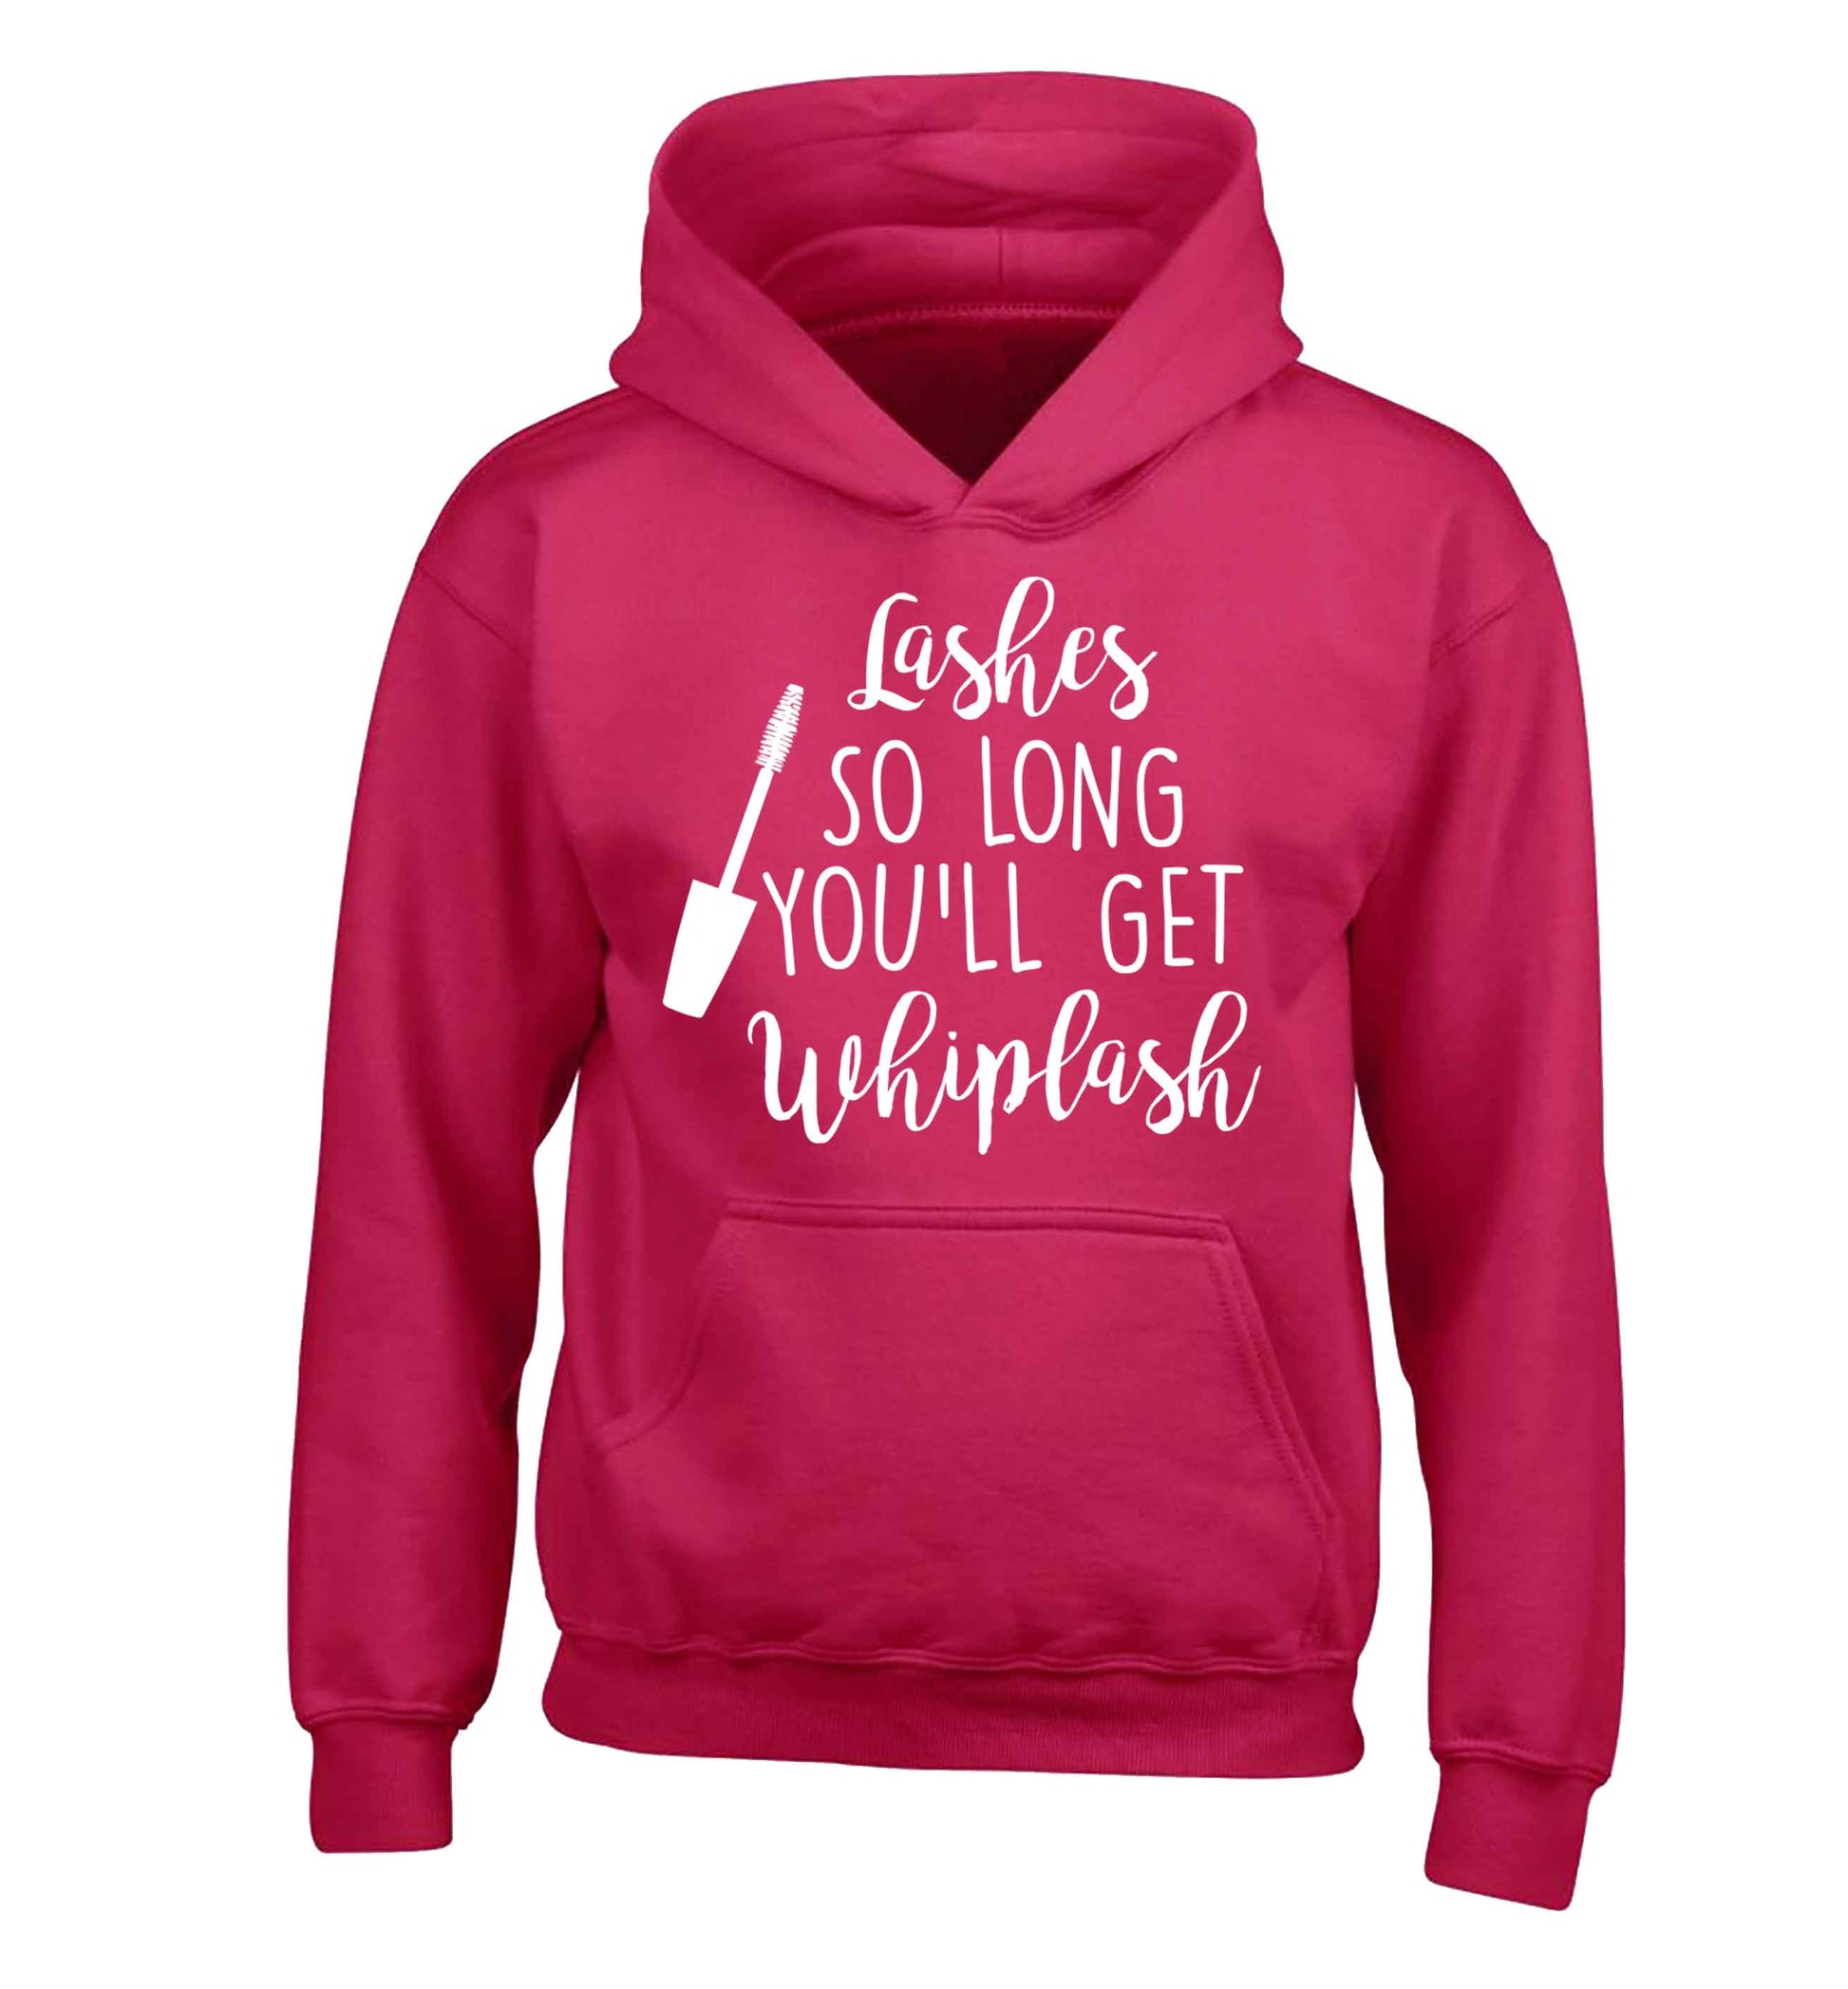 Lashes so long you'll get whiplash children's pink hoodie 12-13 Years